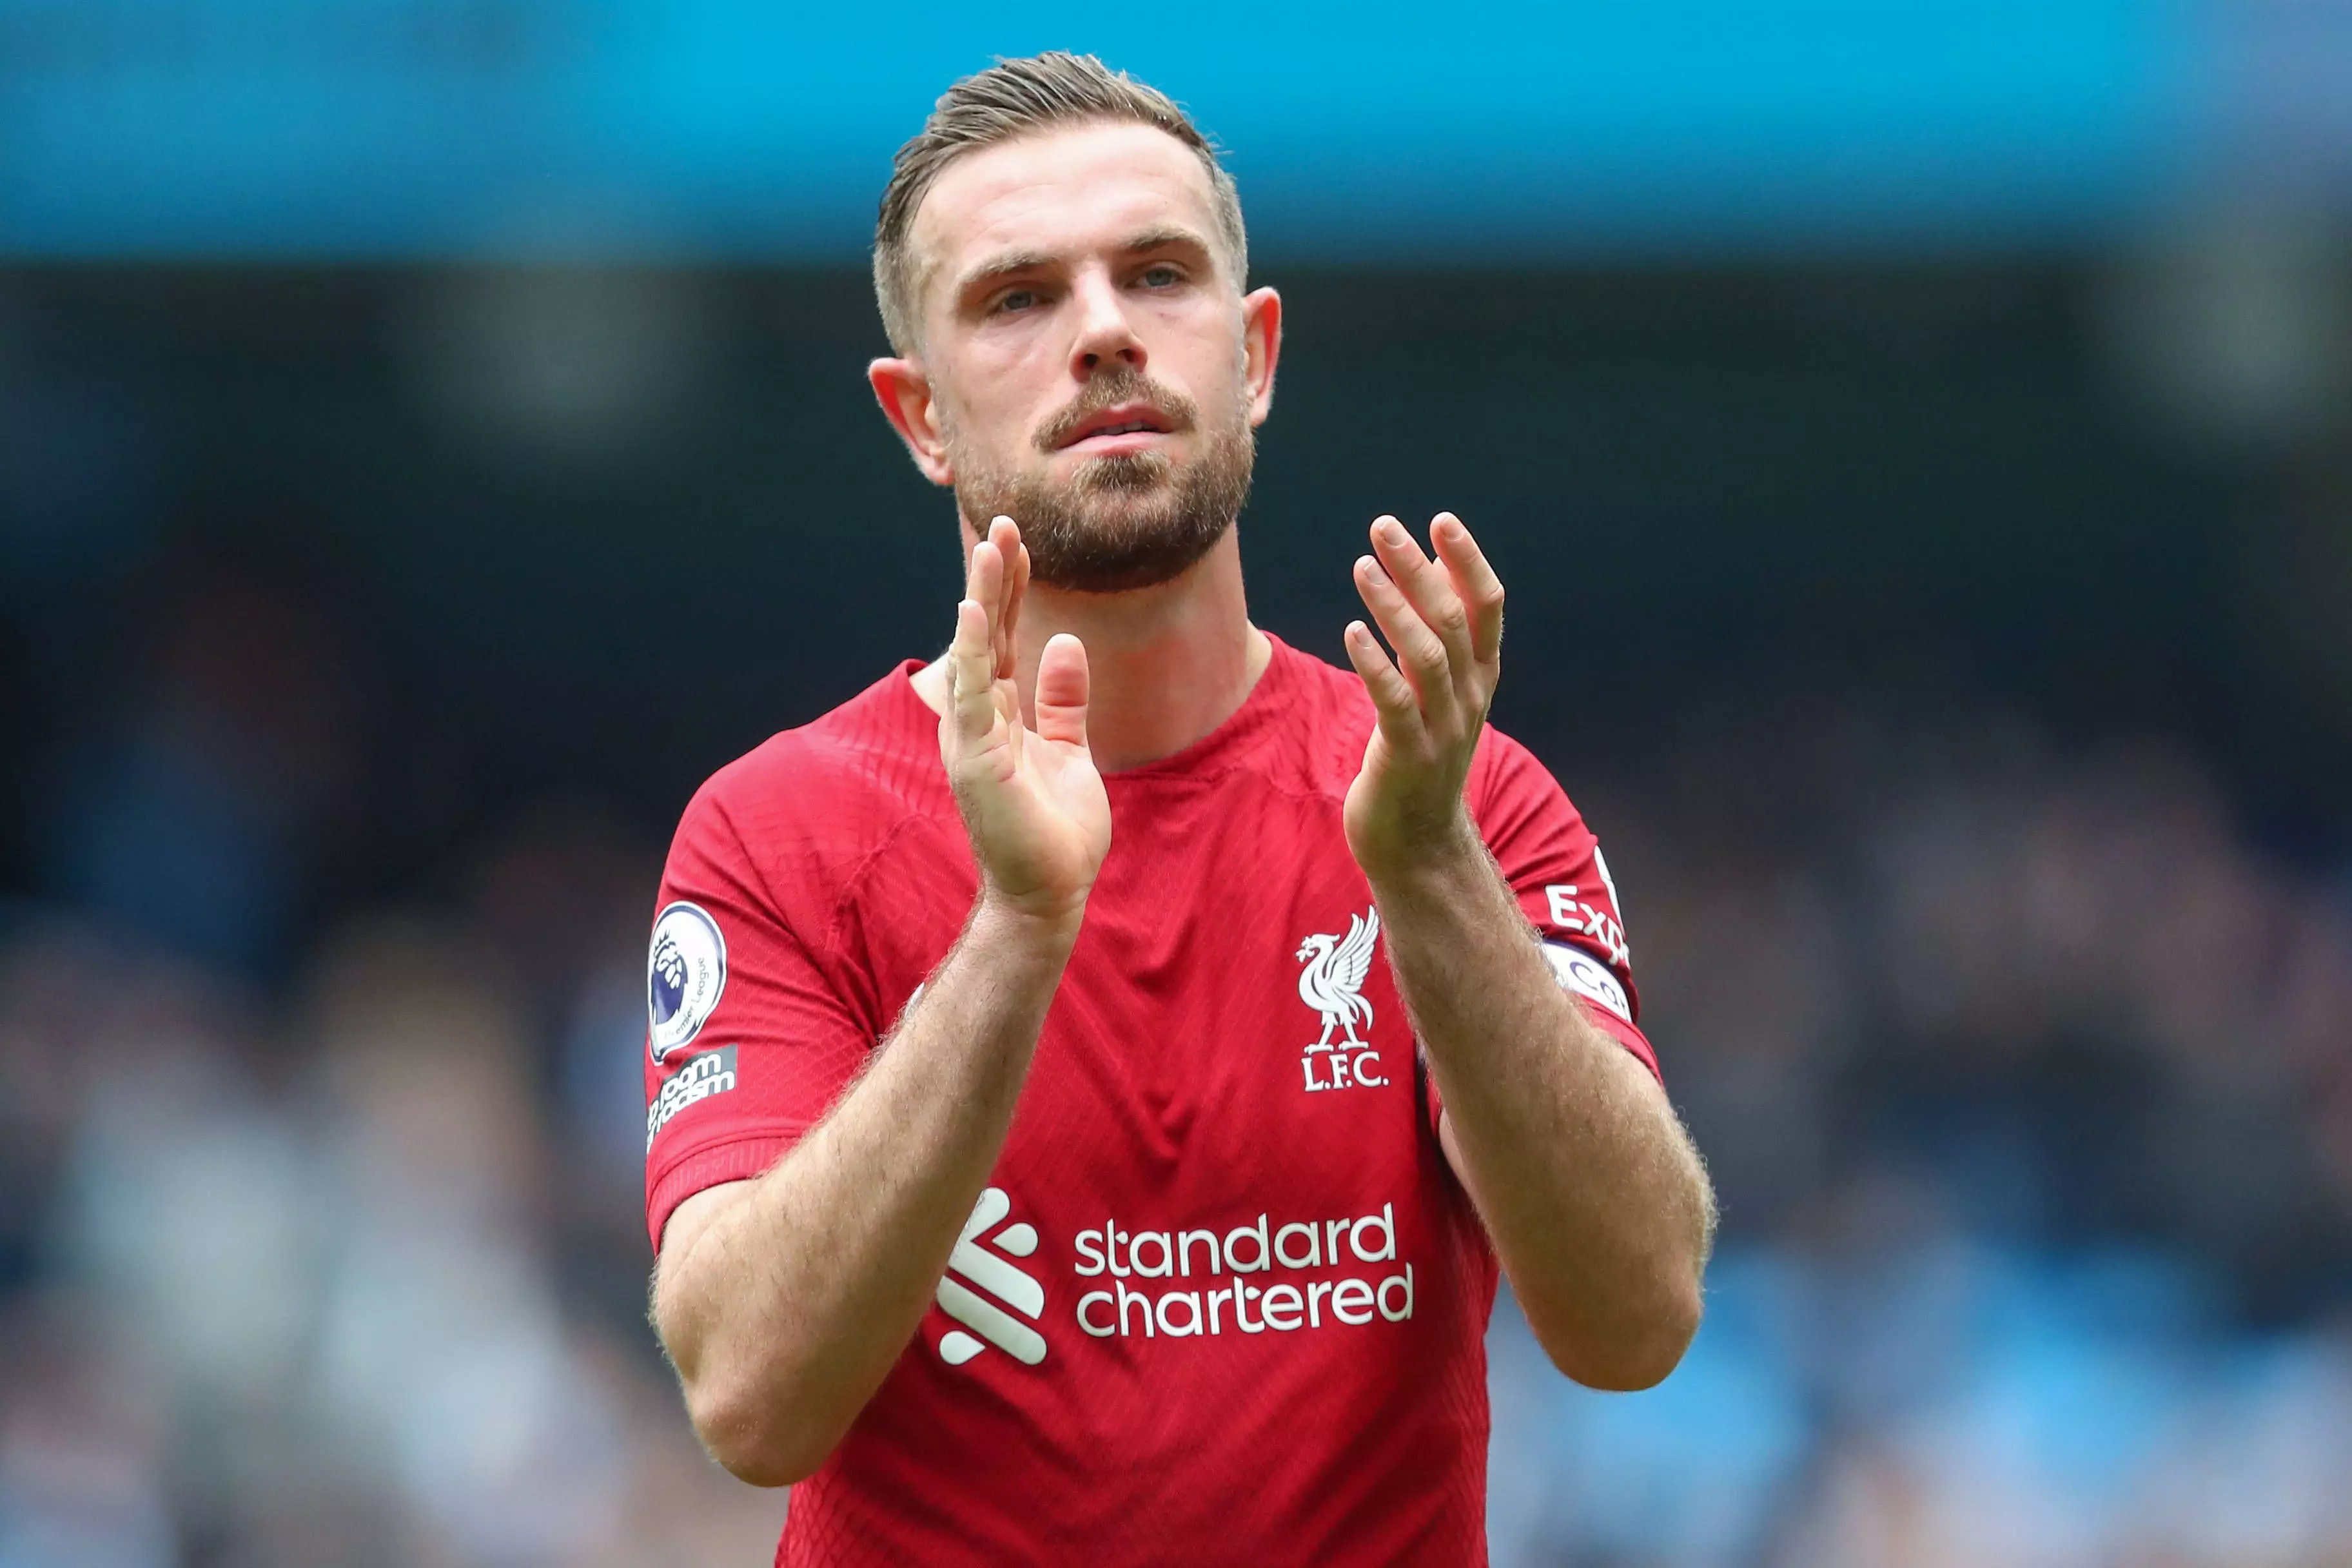 Jordan Henderson is one of the highest-paid players in Liverpool